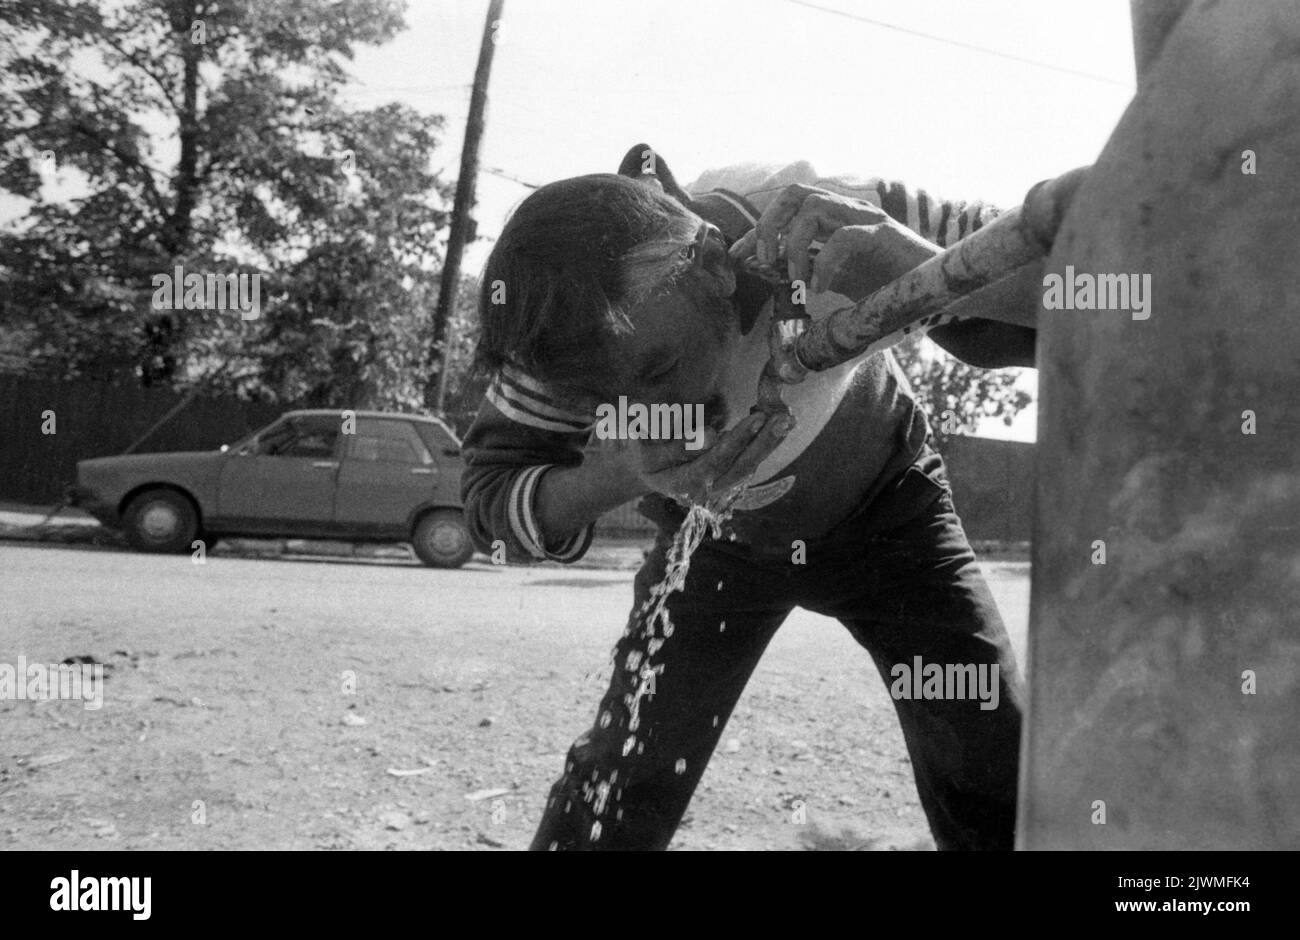 Bucharest, Romania, 1990. Man drinking from a water fountain on the street. Stock Photo